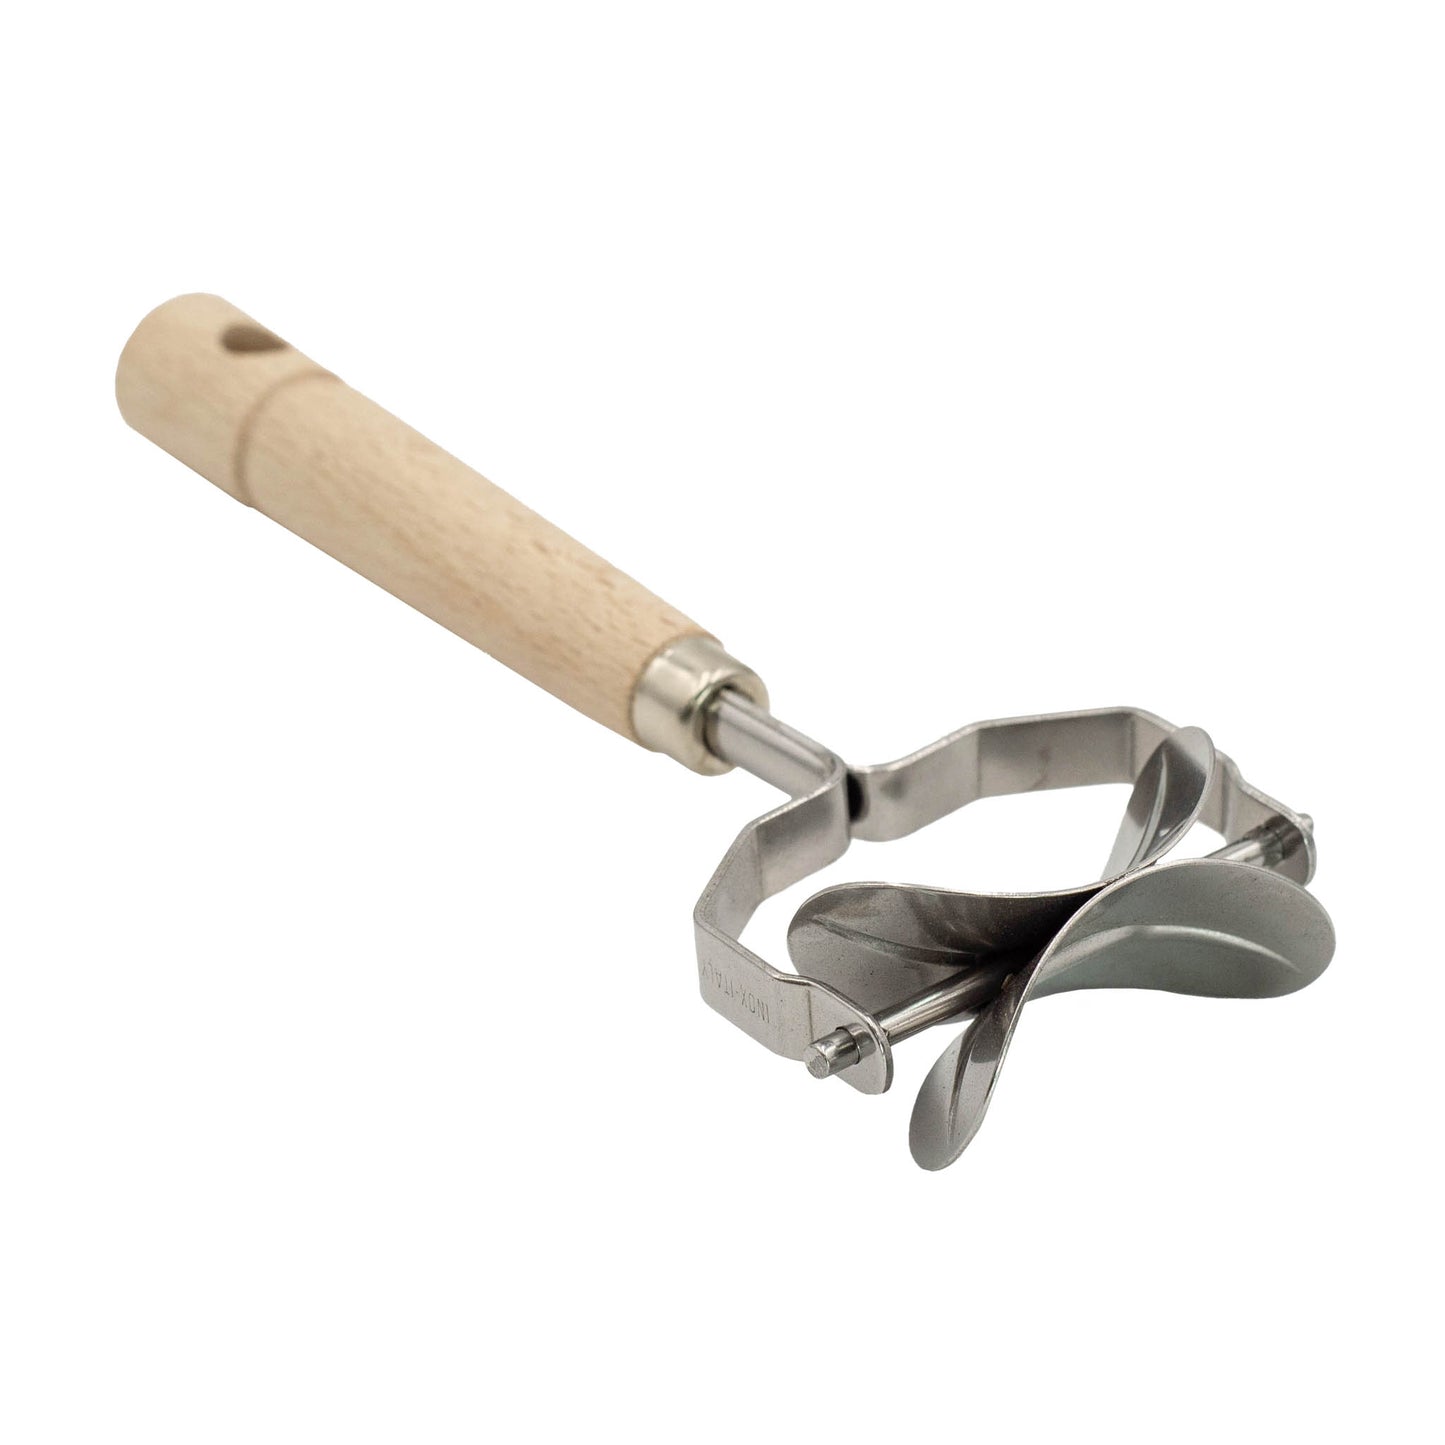 Italian Made large oval tortellini cutter with wooden handle.